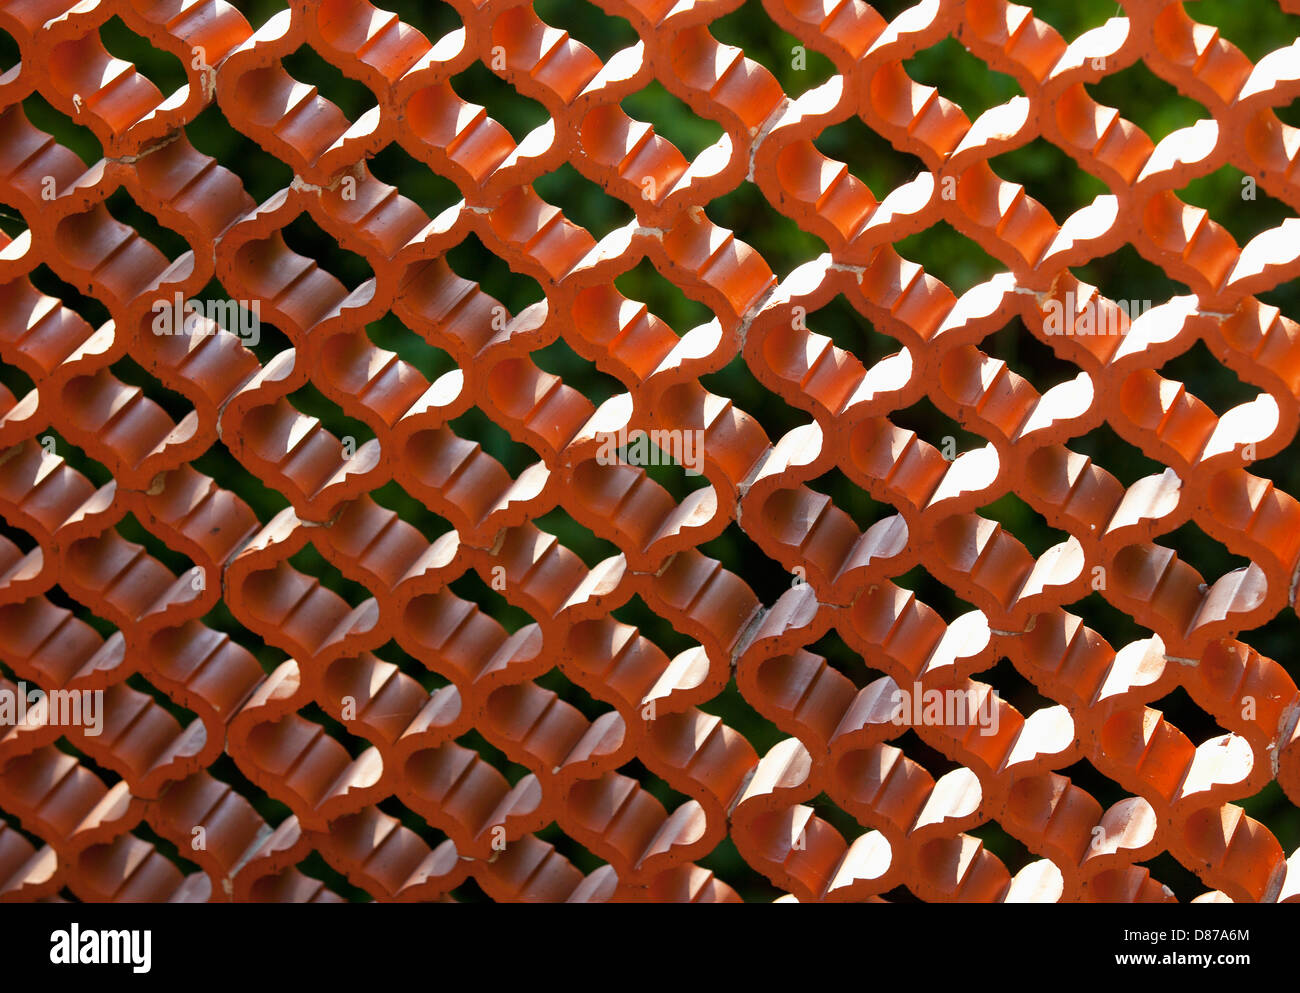 Croatia, Structure of red fence, close up Stock Photo